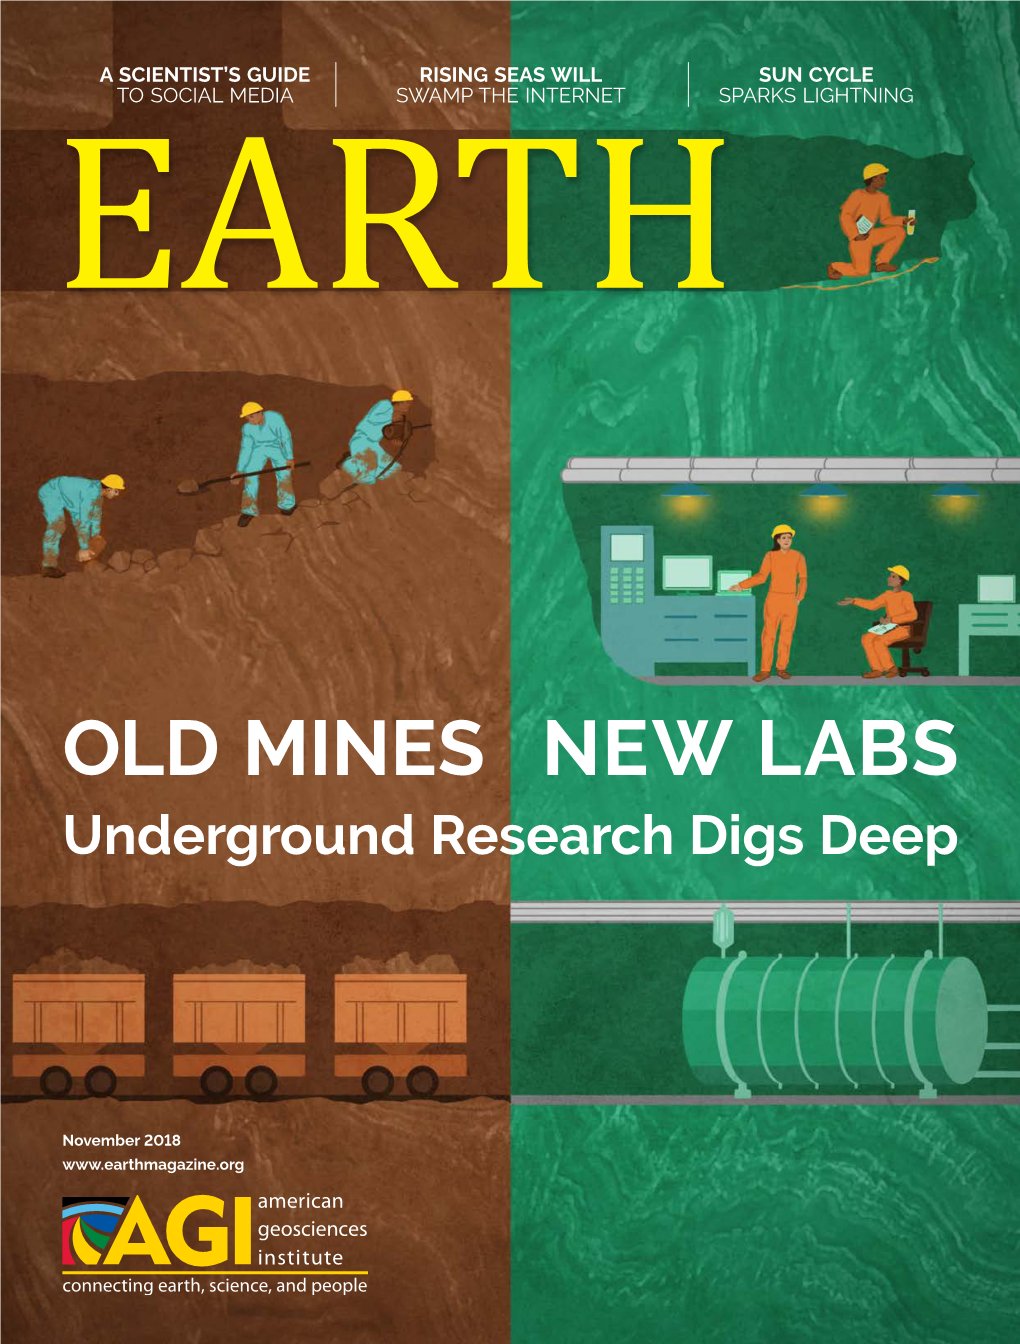 OLD MINES NEW LABS Underground Research Digs Deep